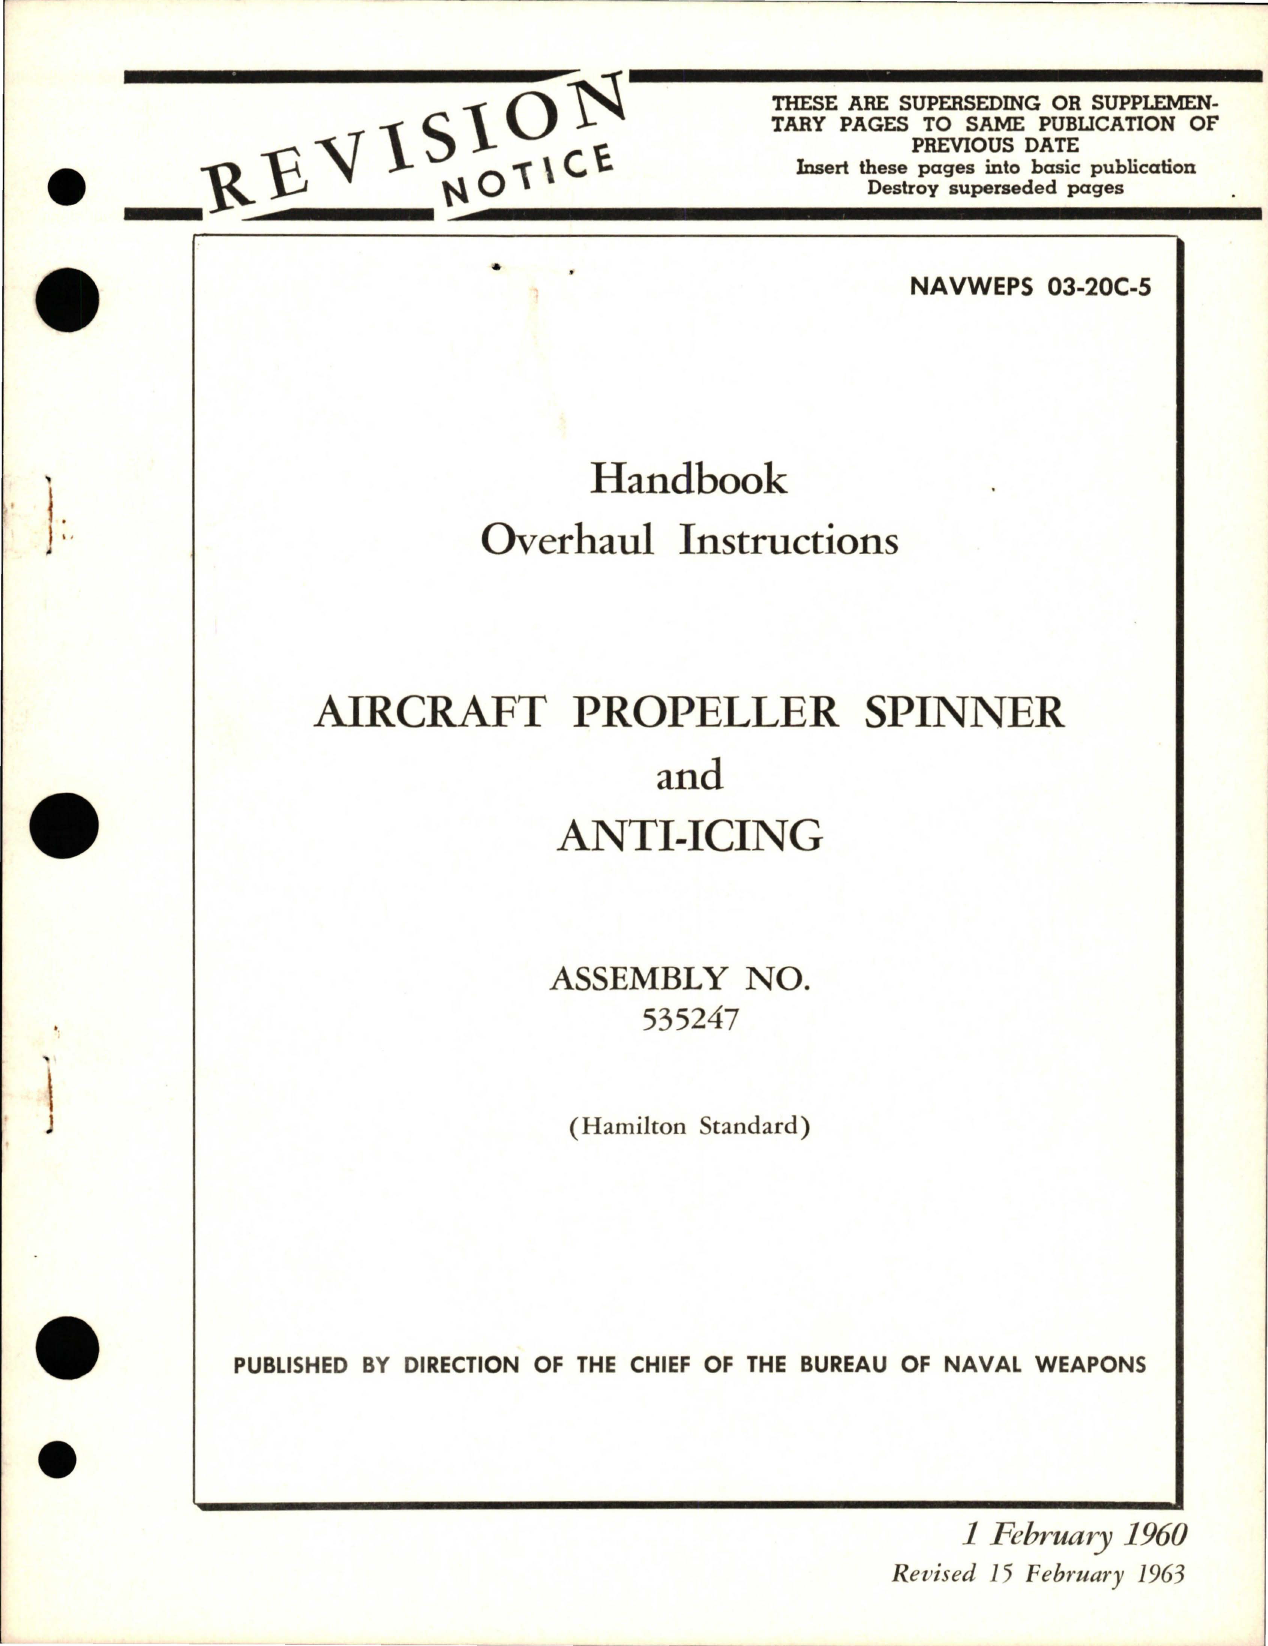 Sample page 1 from AirCorps Library document: Overhaul Instructions for Aircraft Propeller Spinner and Anti-Icing - Assembly No. 535247